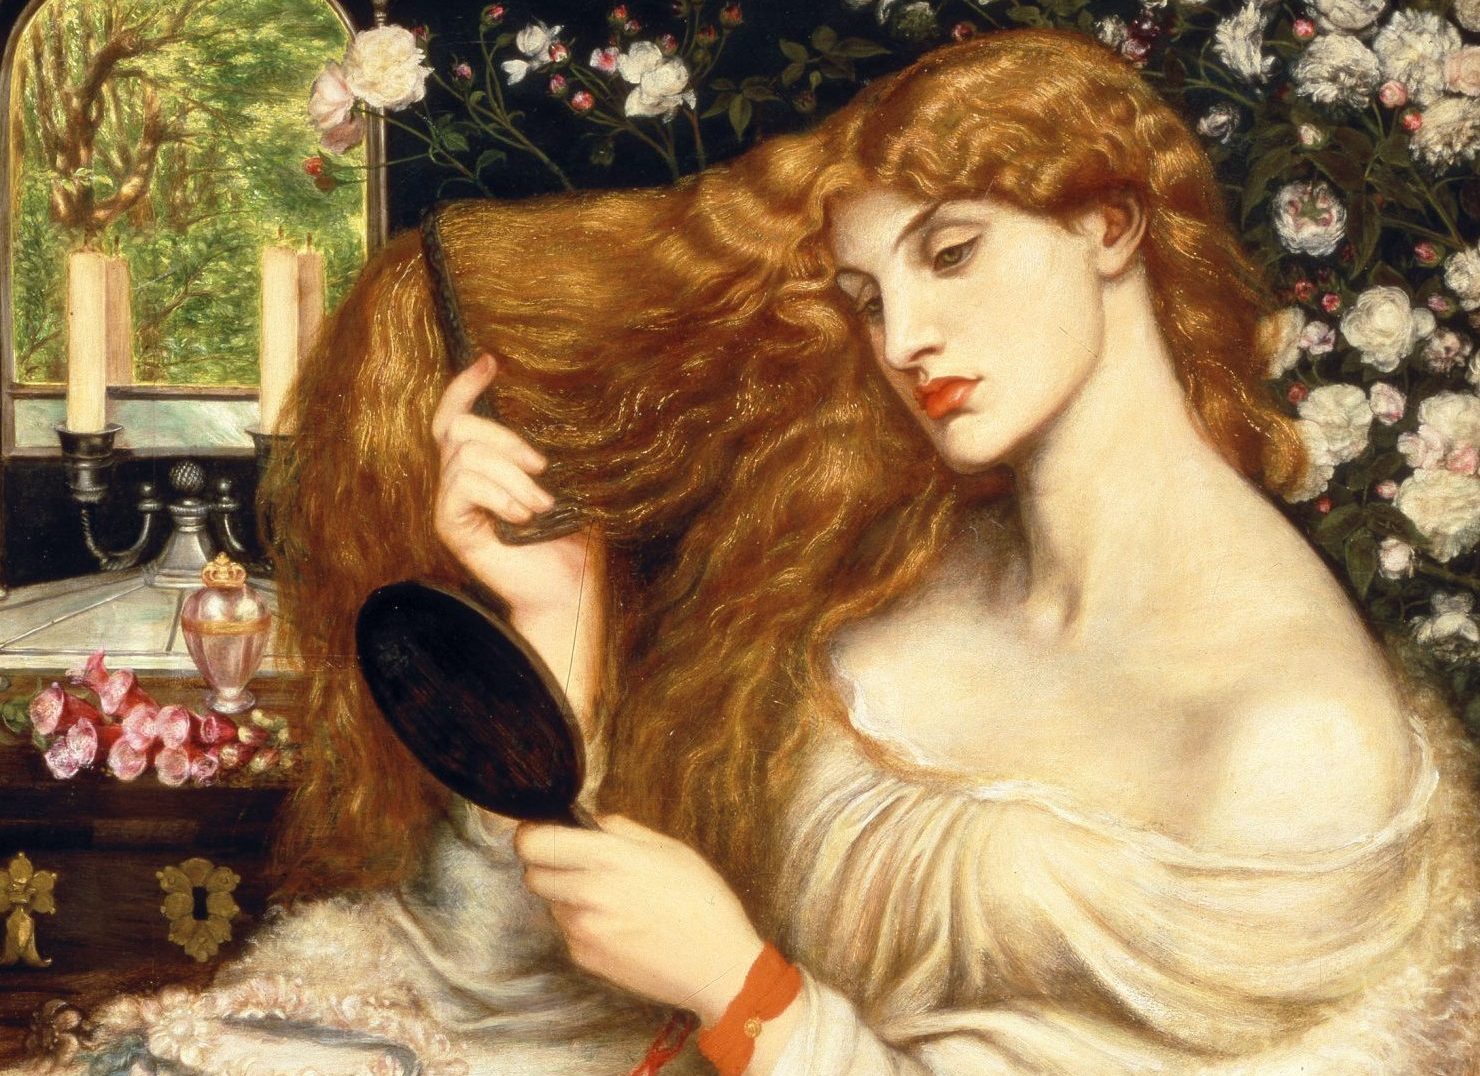 Painting of Lady Lilith combing her long, flaxen hair and gazing into a mirror